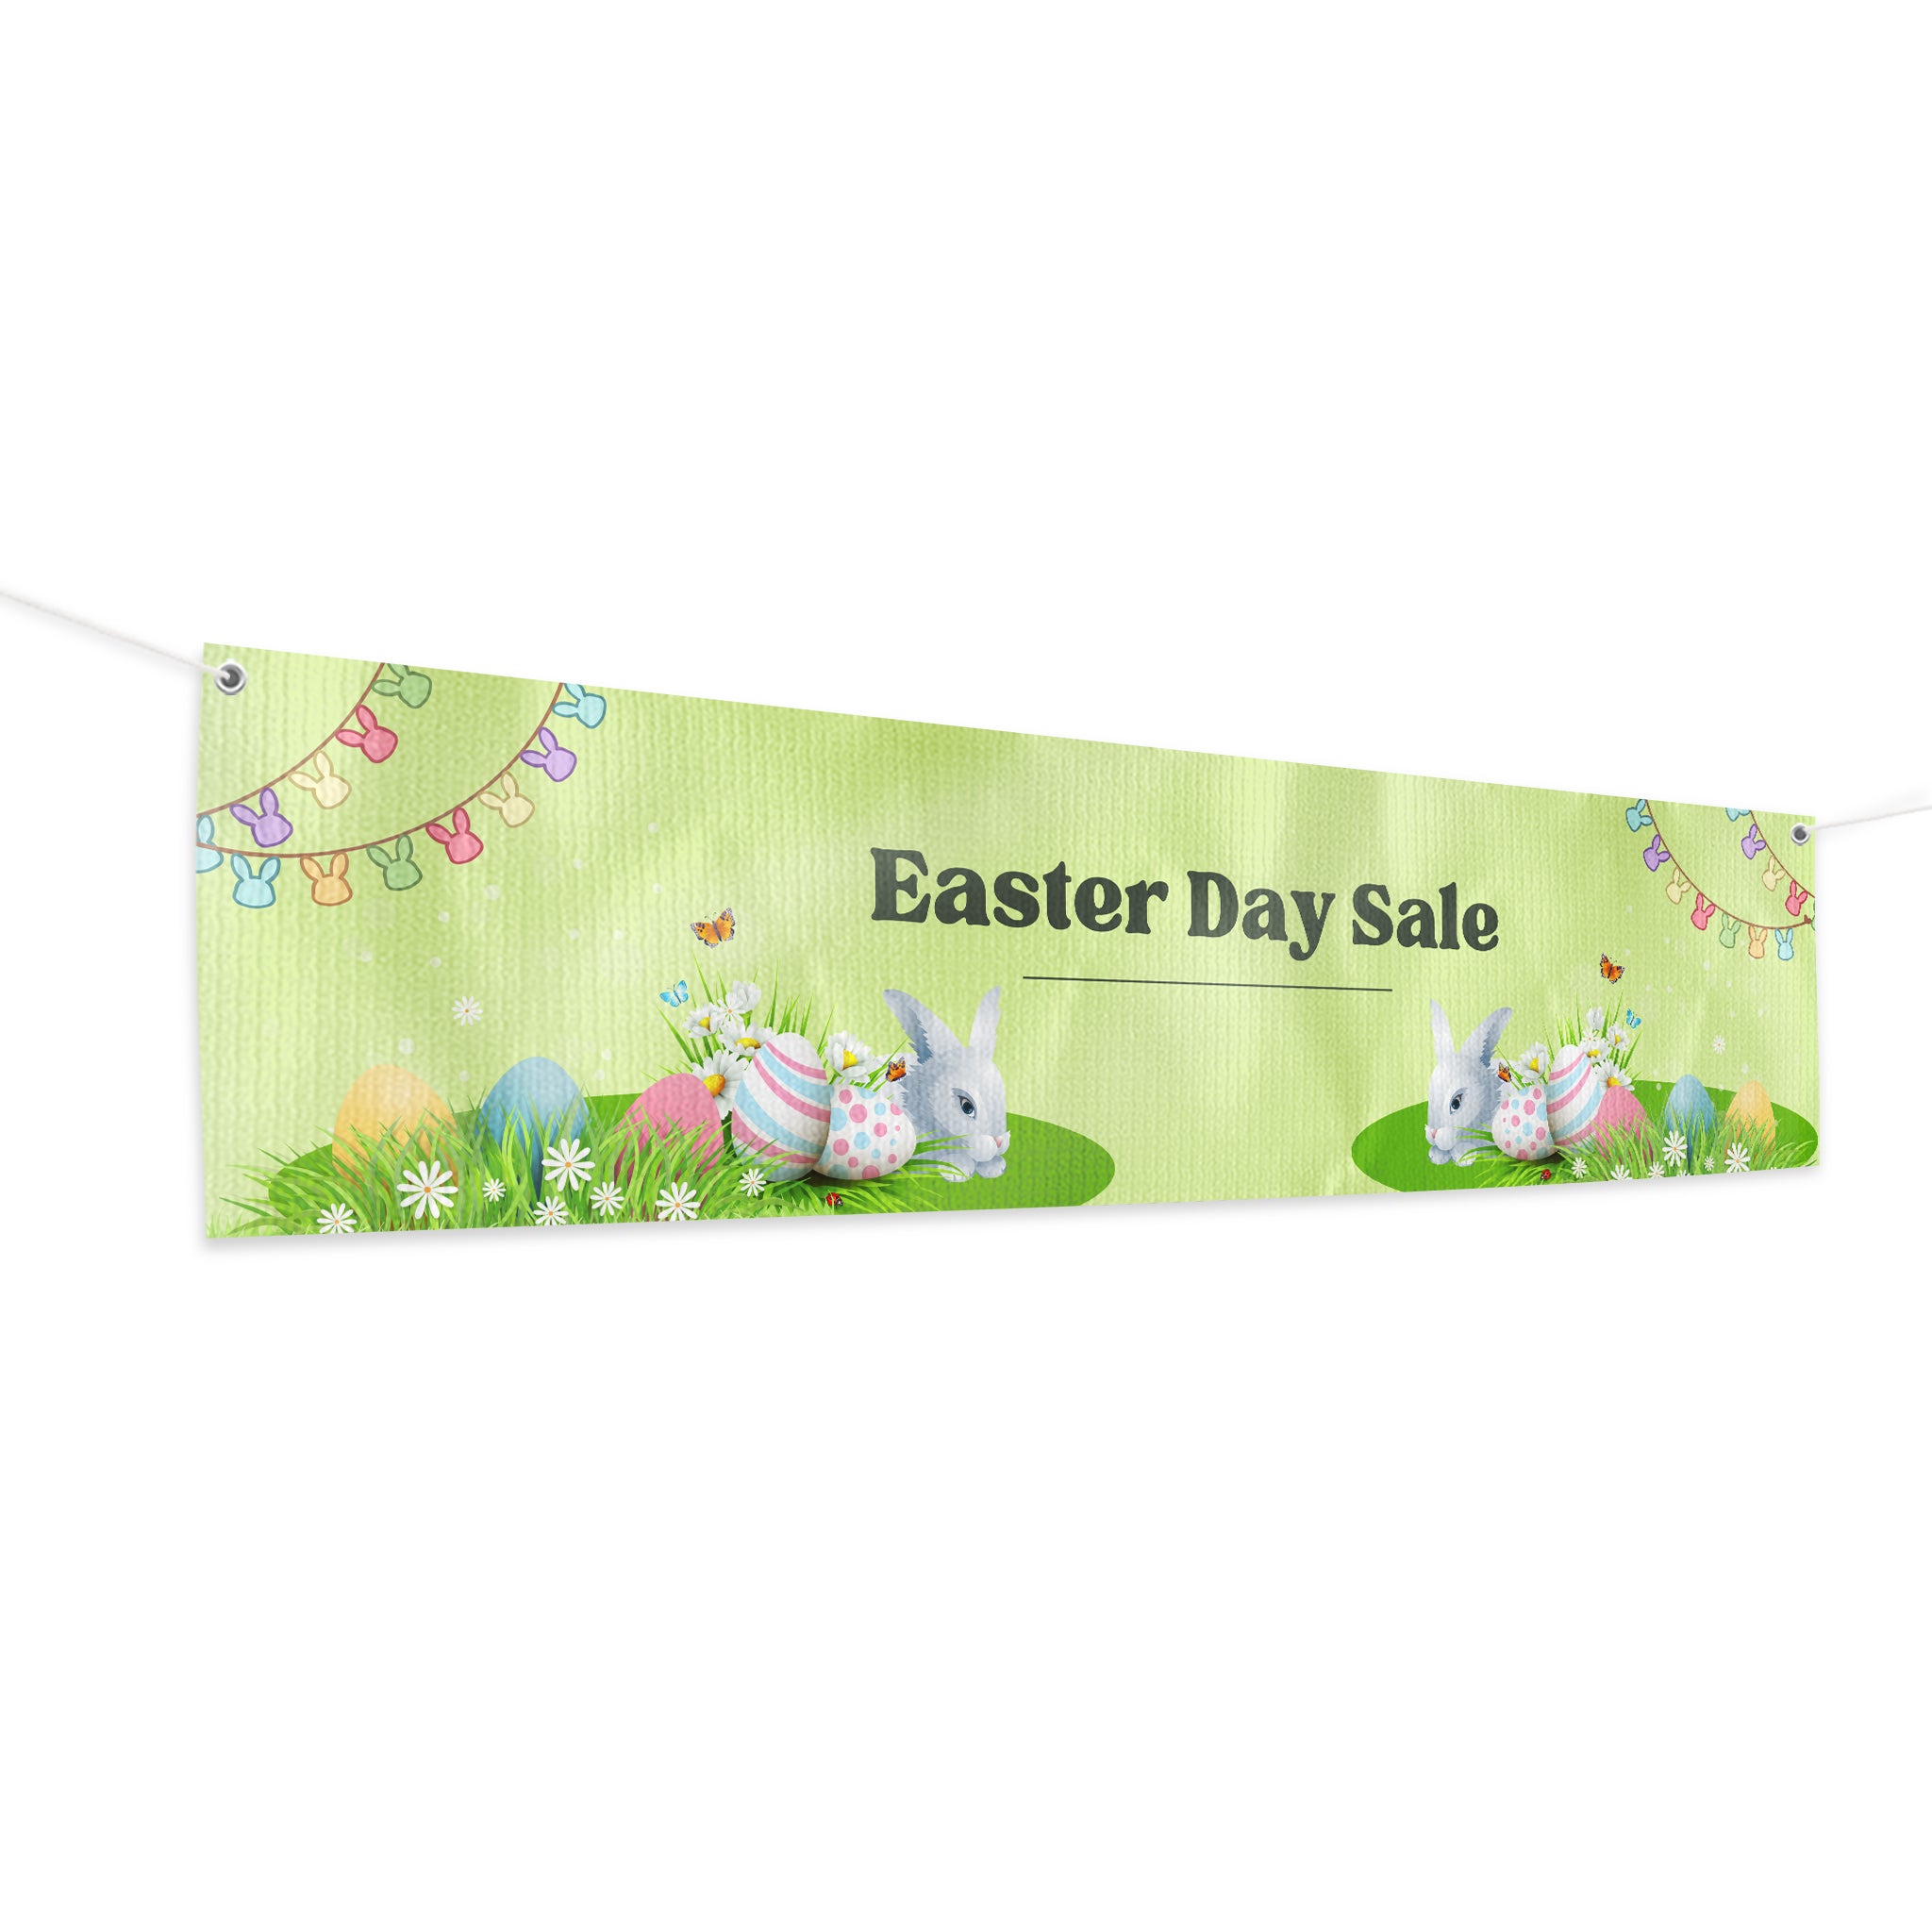 Easter Day Sale Large Banner